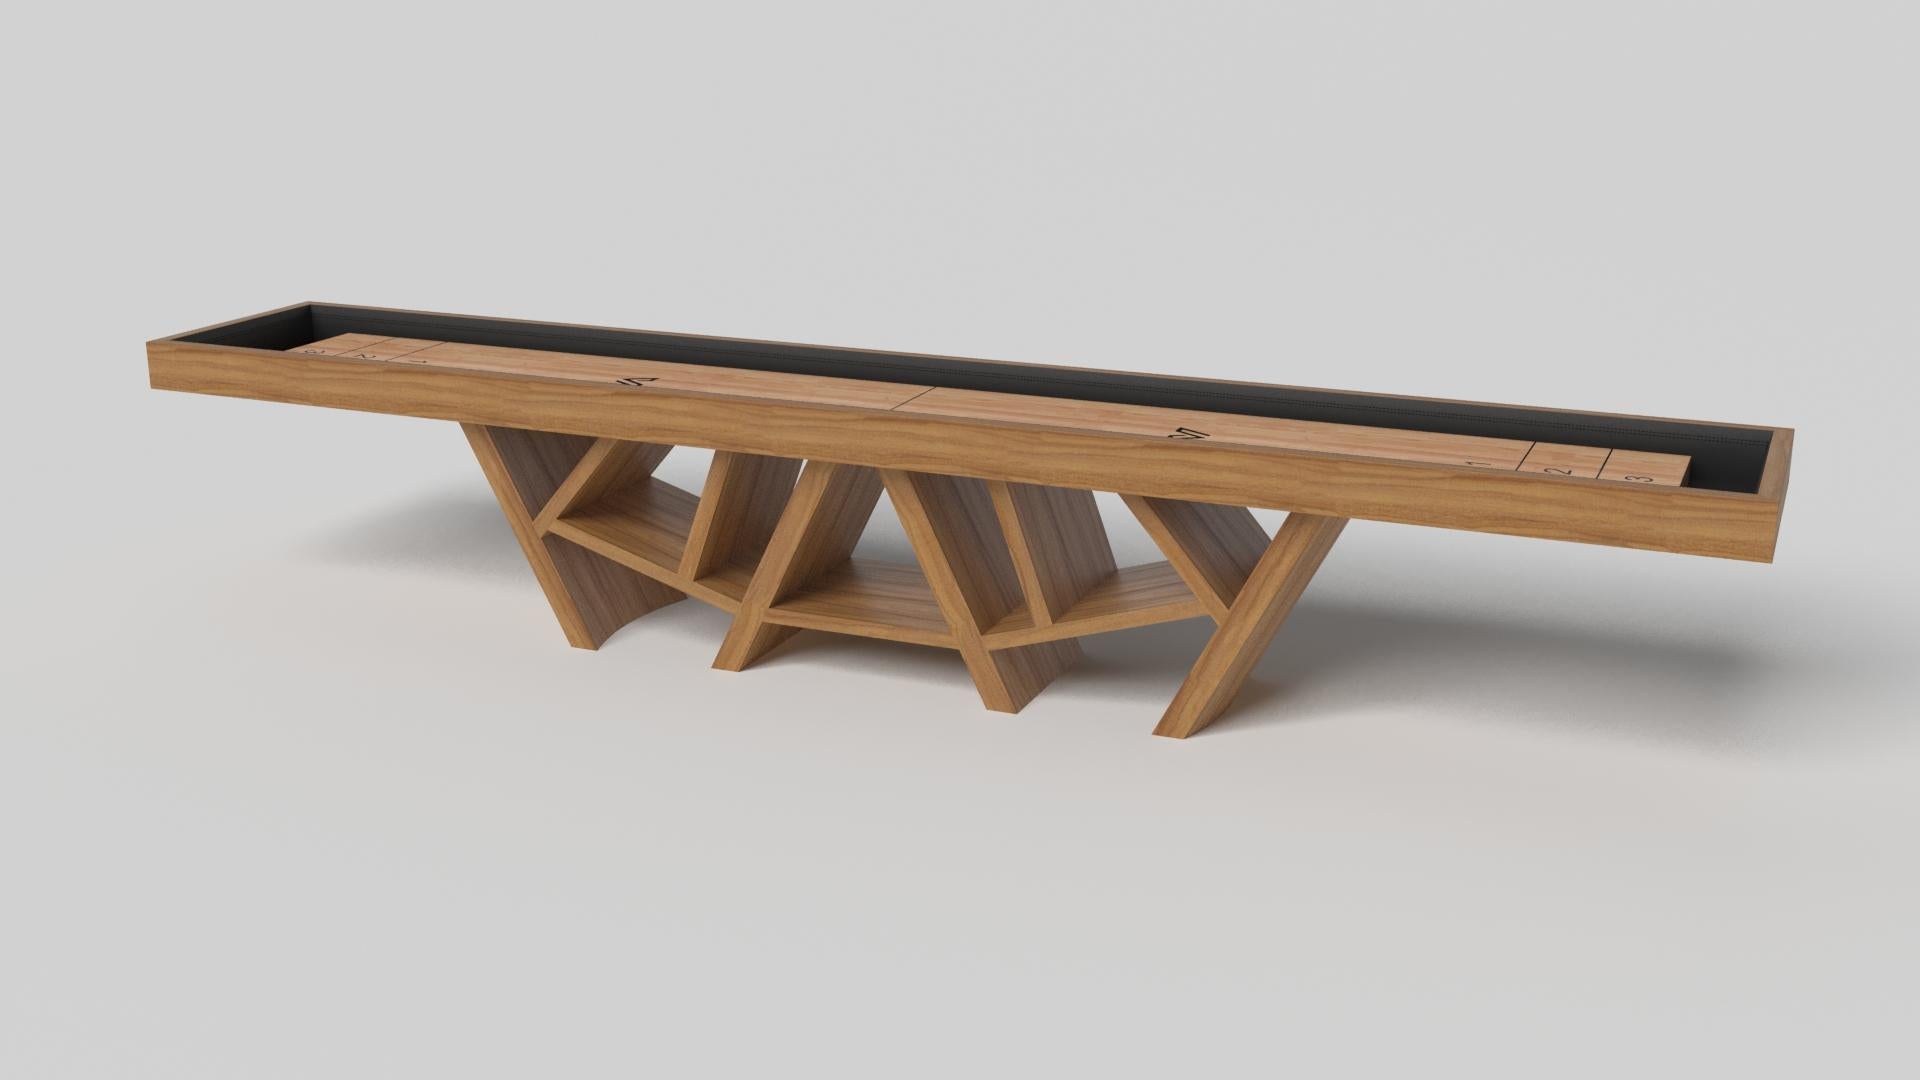 With a combination of acute angles, smooth lines, and geometric configurations, the Maze shuffleboard table in walnut is characterized by a labyrinth-inspired base with a mystifying motif. Beautifully detailed with a smooth black top for game play,